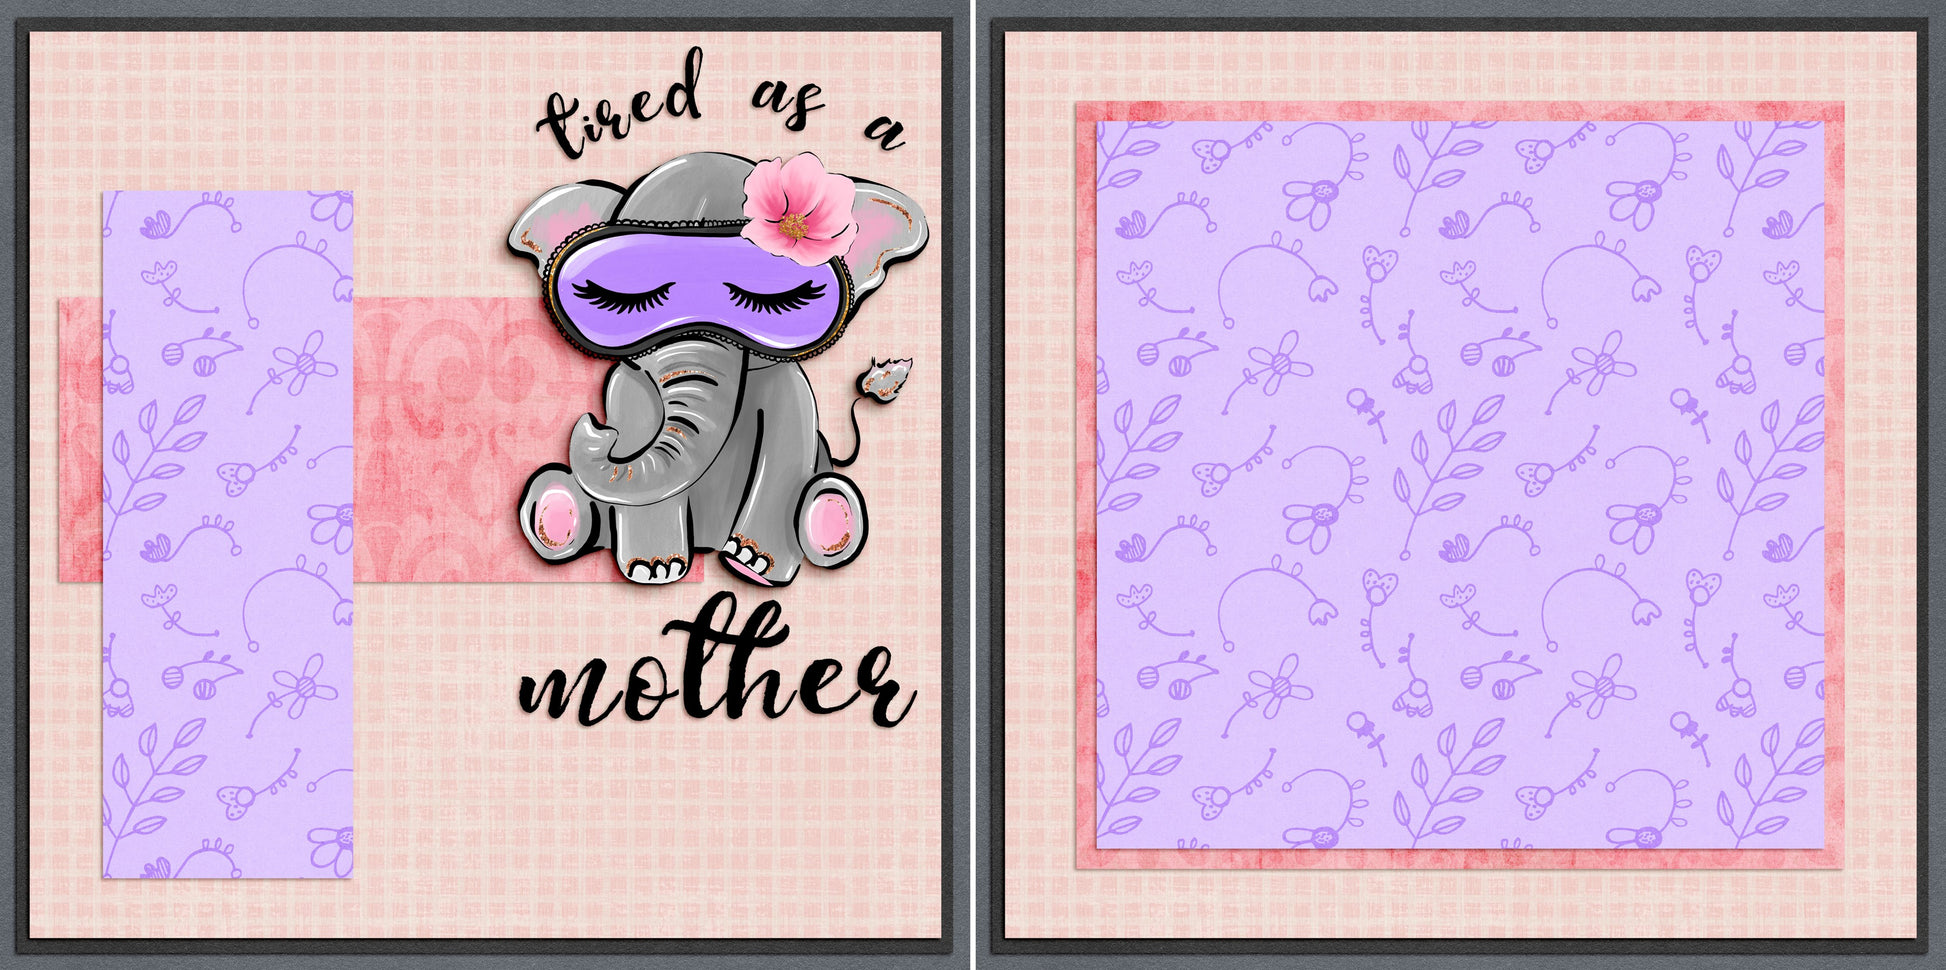 Tired as a Mother NPM - 5343 - EZscrapbooks Scrapbook Layouts Baby - Toddler, mom, Mother